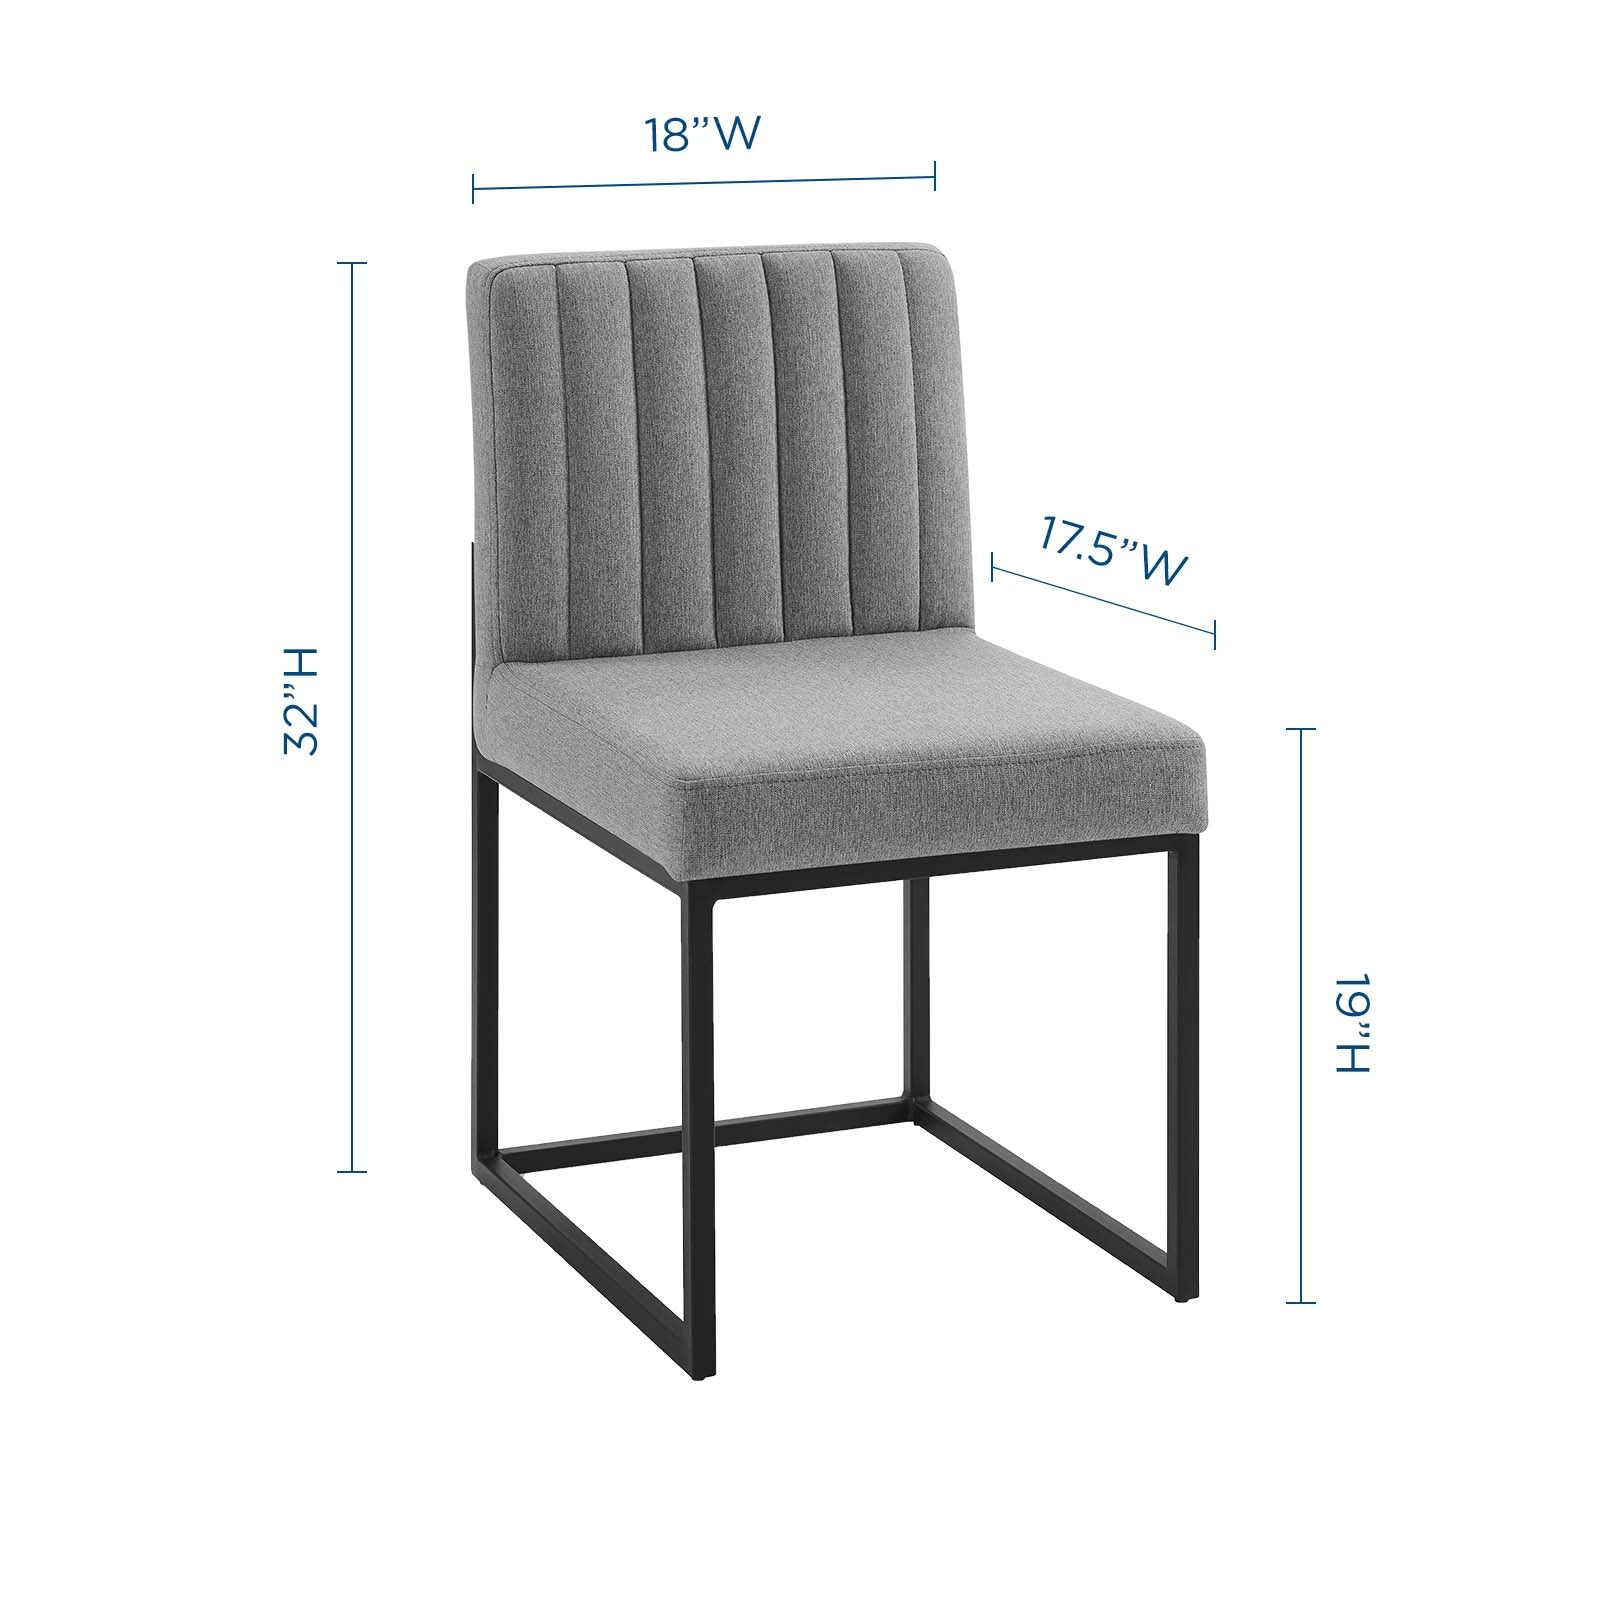 Carriage Channel Tufted Sled Base Upholstered Fabric Dining Chair-Dining Chair-Modway-Wall2Wall Furnishings